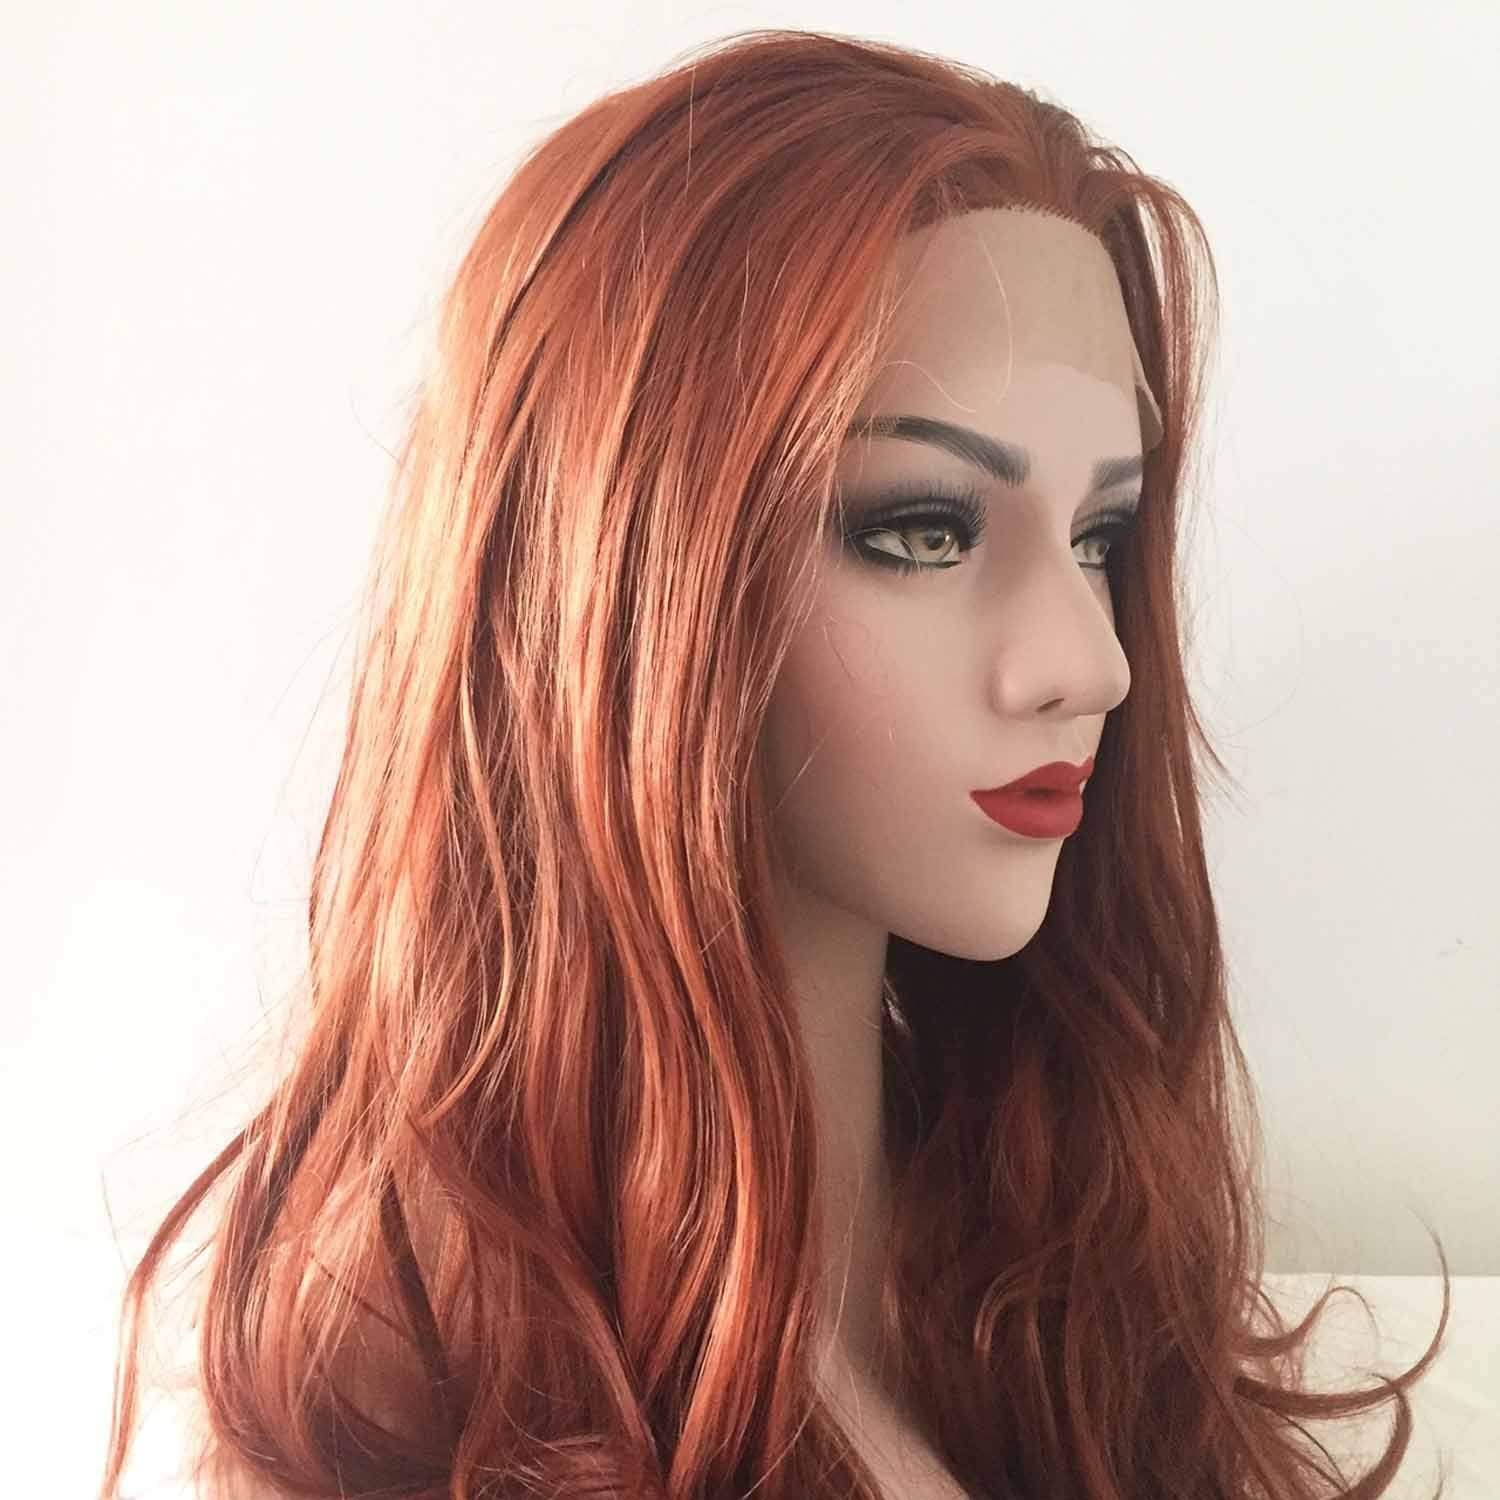 nevermindyrhead Women Auburn Ginger Red Lace Front Long Curly Free Part Wig